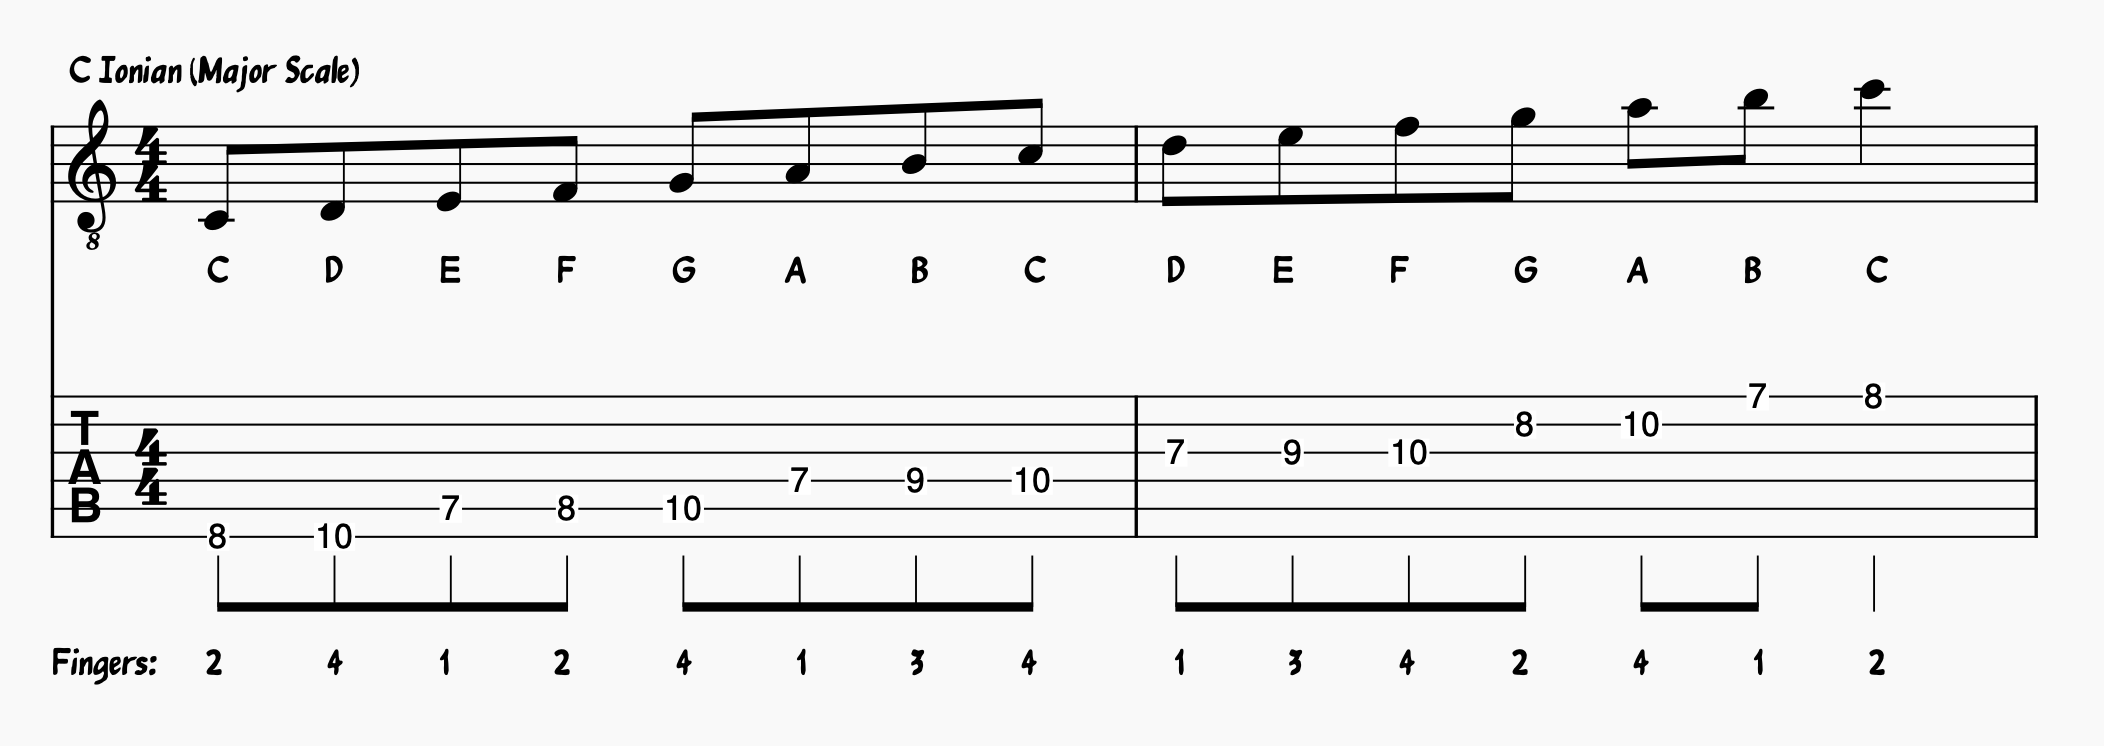 Jazz scales guitar: Ionian Scale in C major on guitar; Major Scale